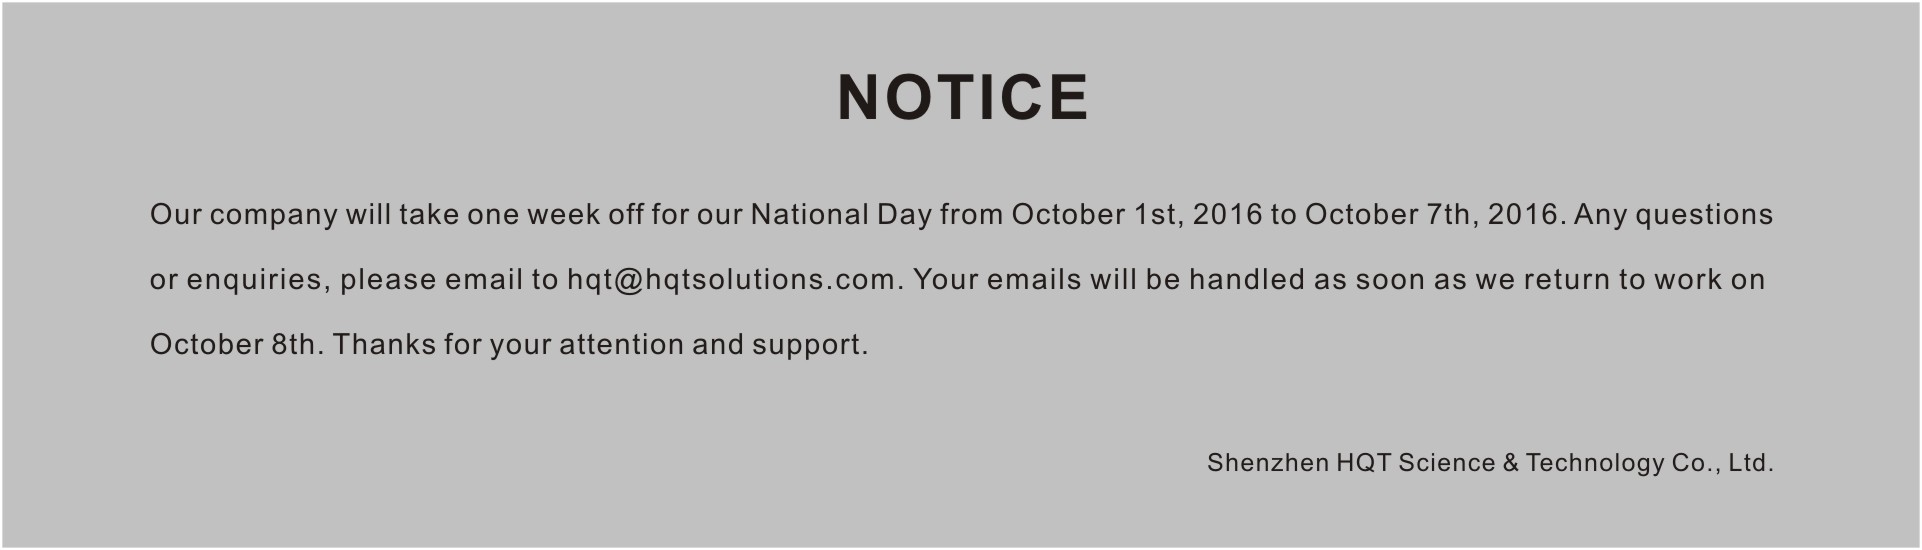 Notice of Holiday for China’s National Day